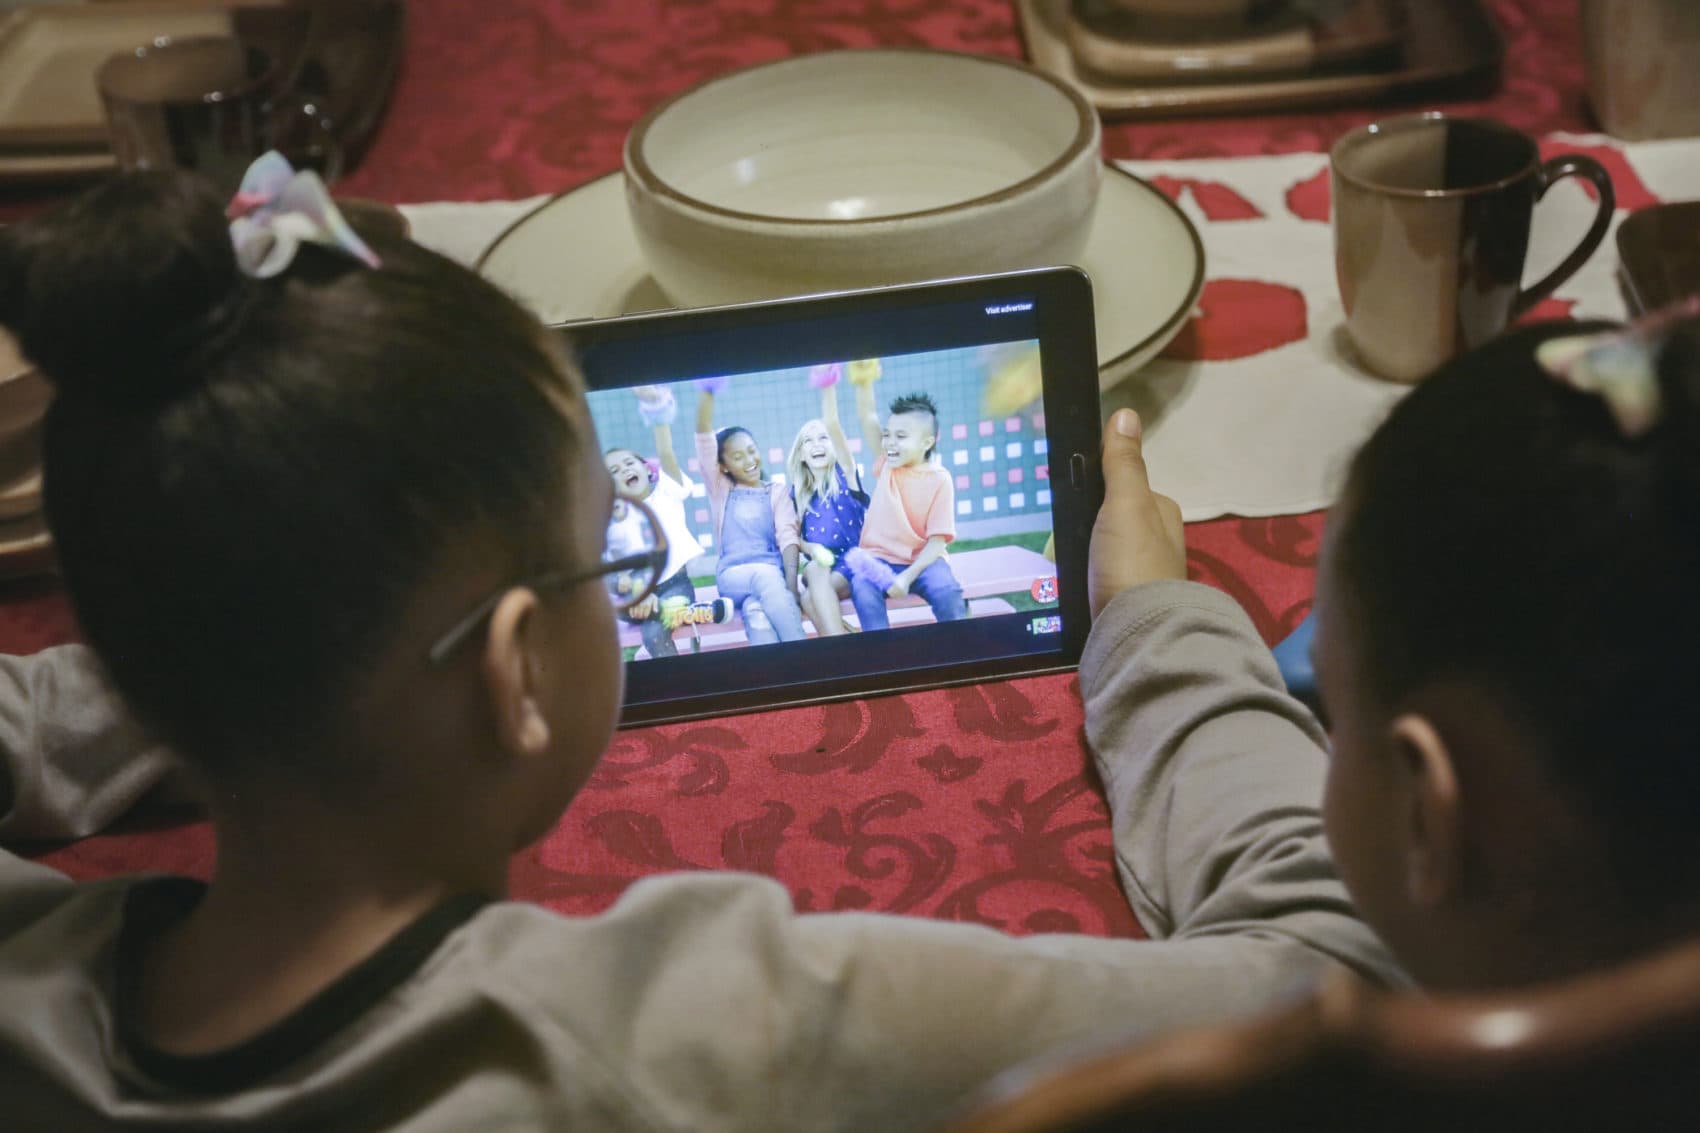 Watching 'unboxing' videos online could benefit children, suggests